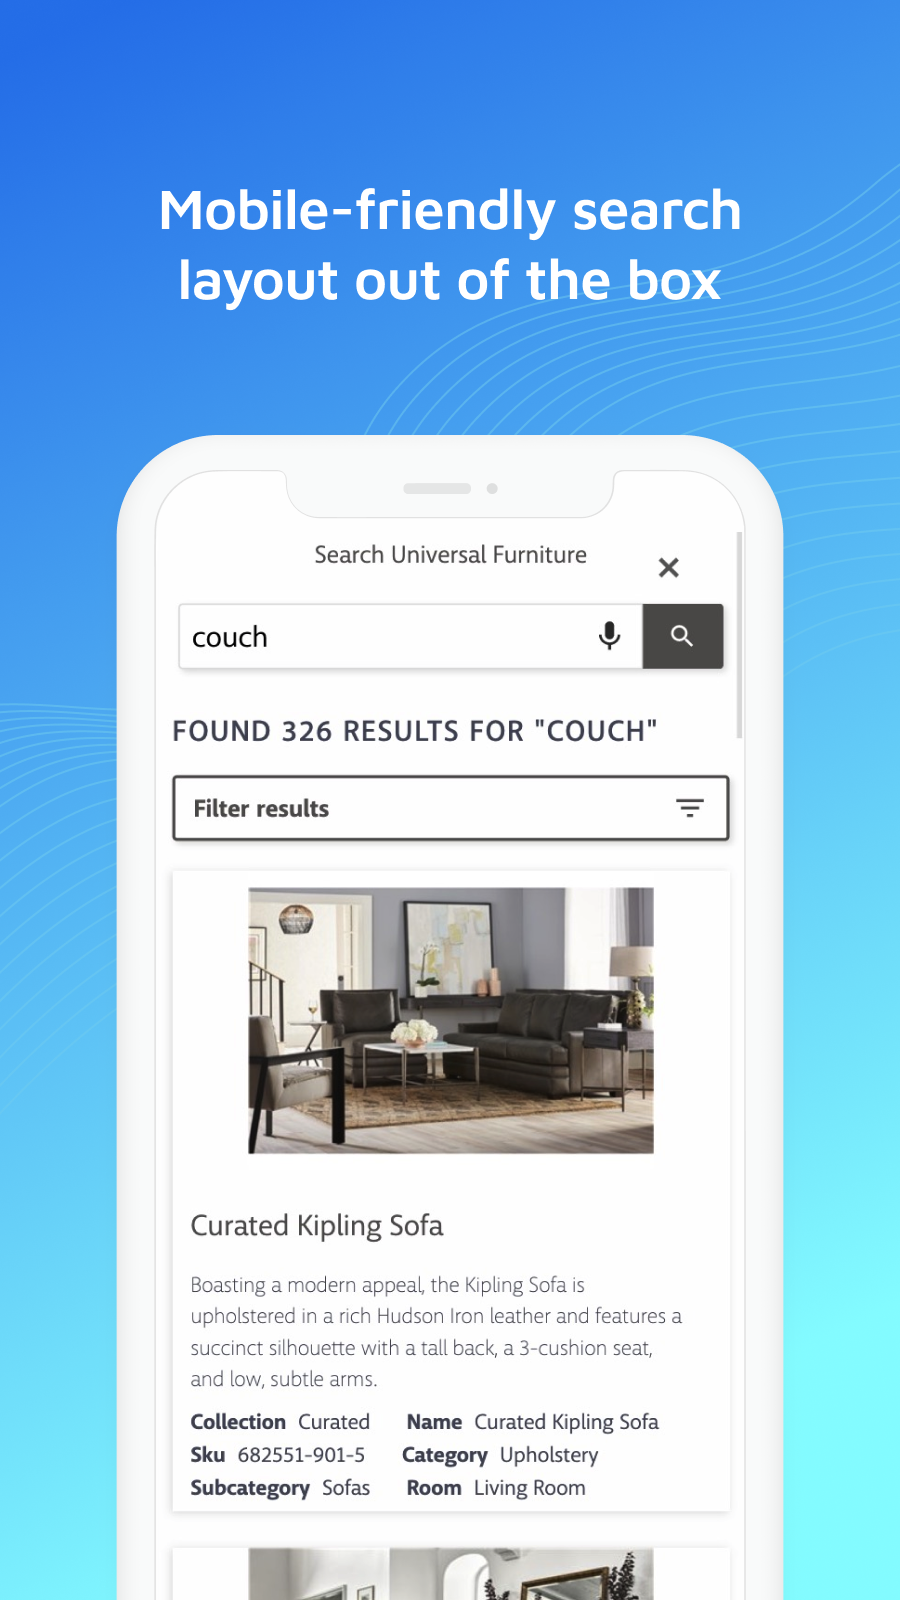 Site Search 360 offers mobile-friendly search layout out of the box